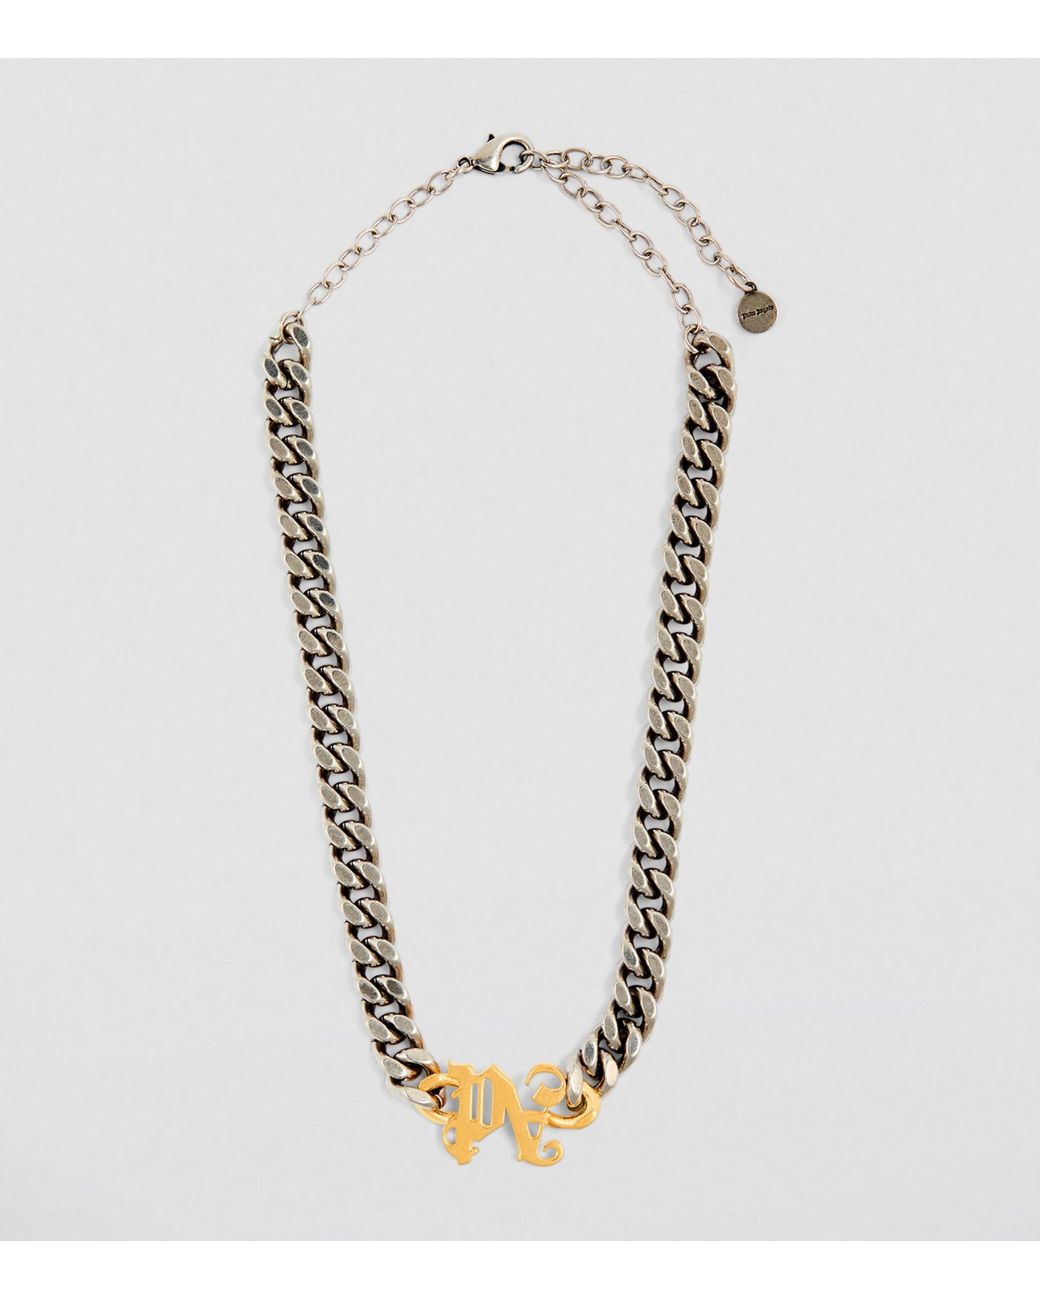 Palm Angels Monogram Chain Necklace - Silver - One Size